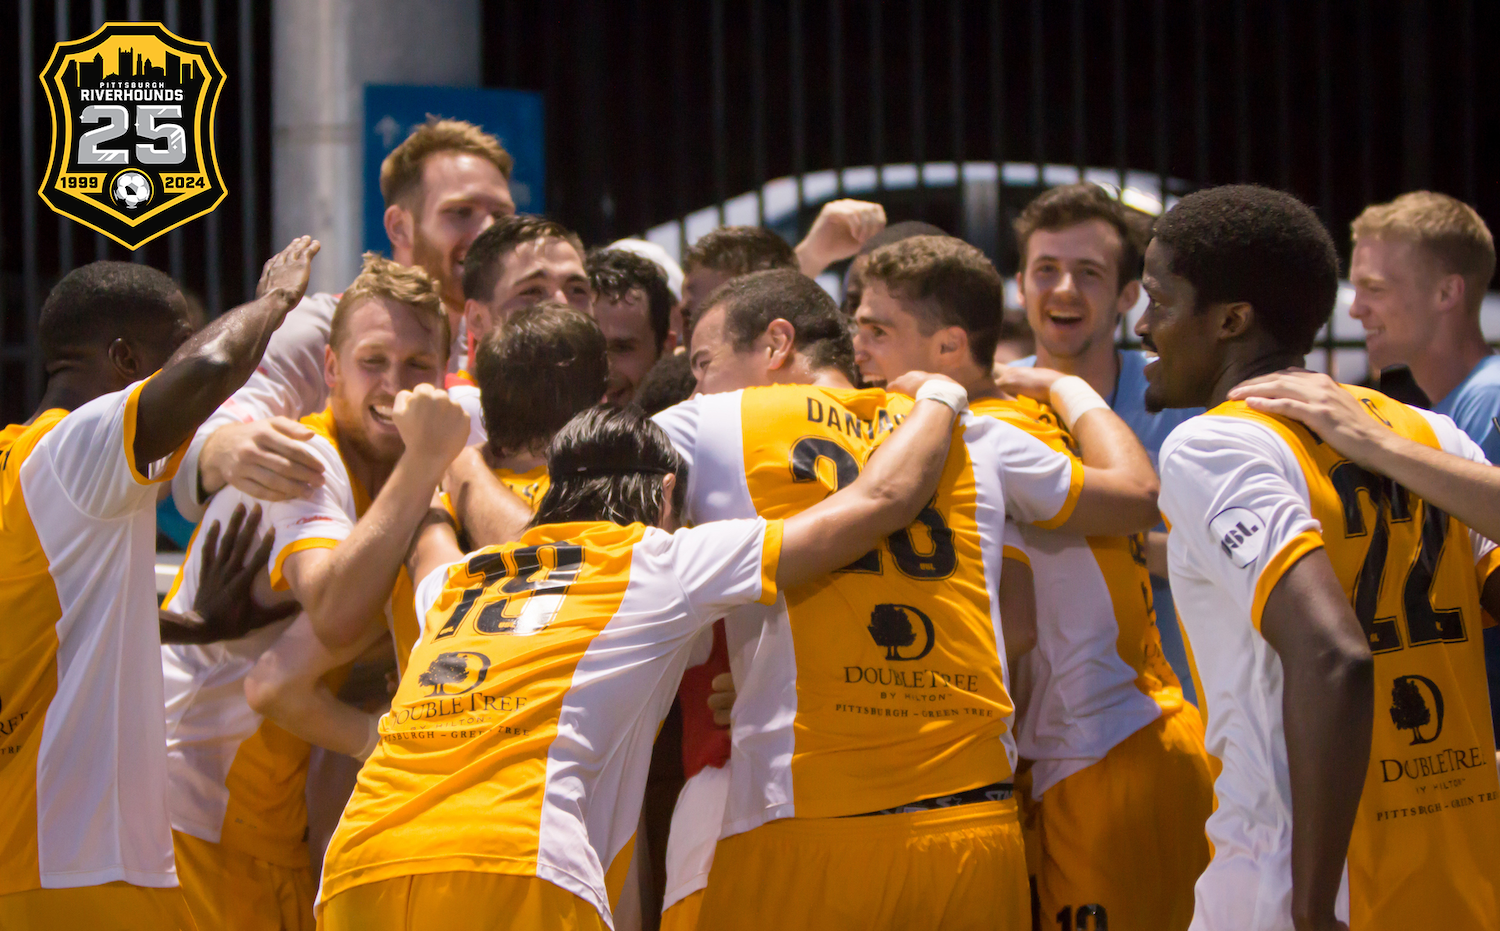 Riverhounds players celebrate after the game-winning goal in their 6-5 victory over the Harrisburg City Islanders on May 30, 2015, the game now permanently etched in team lore as the Miracle on the Mon. (Riverhounds file photo)